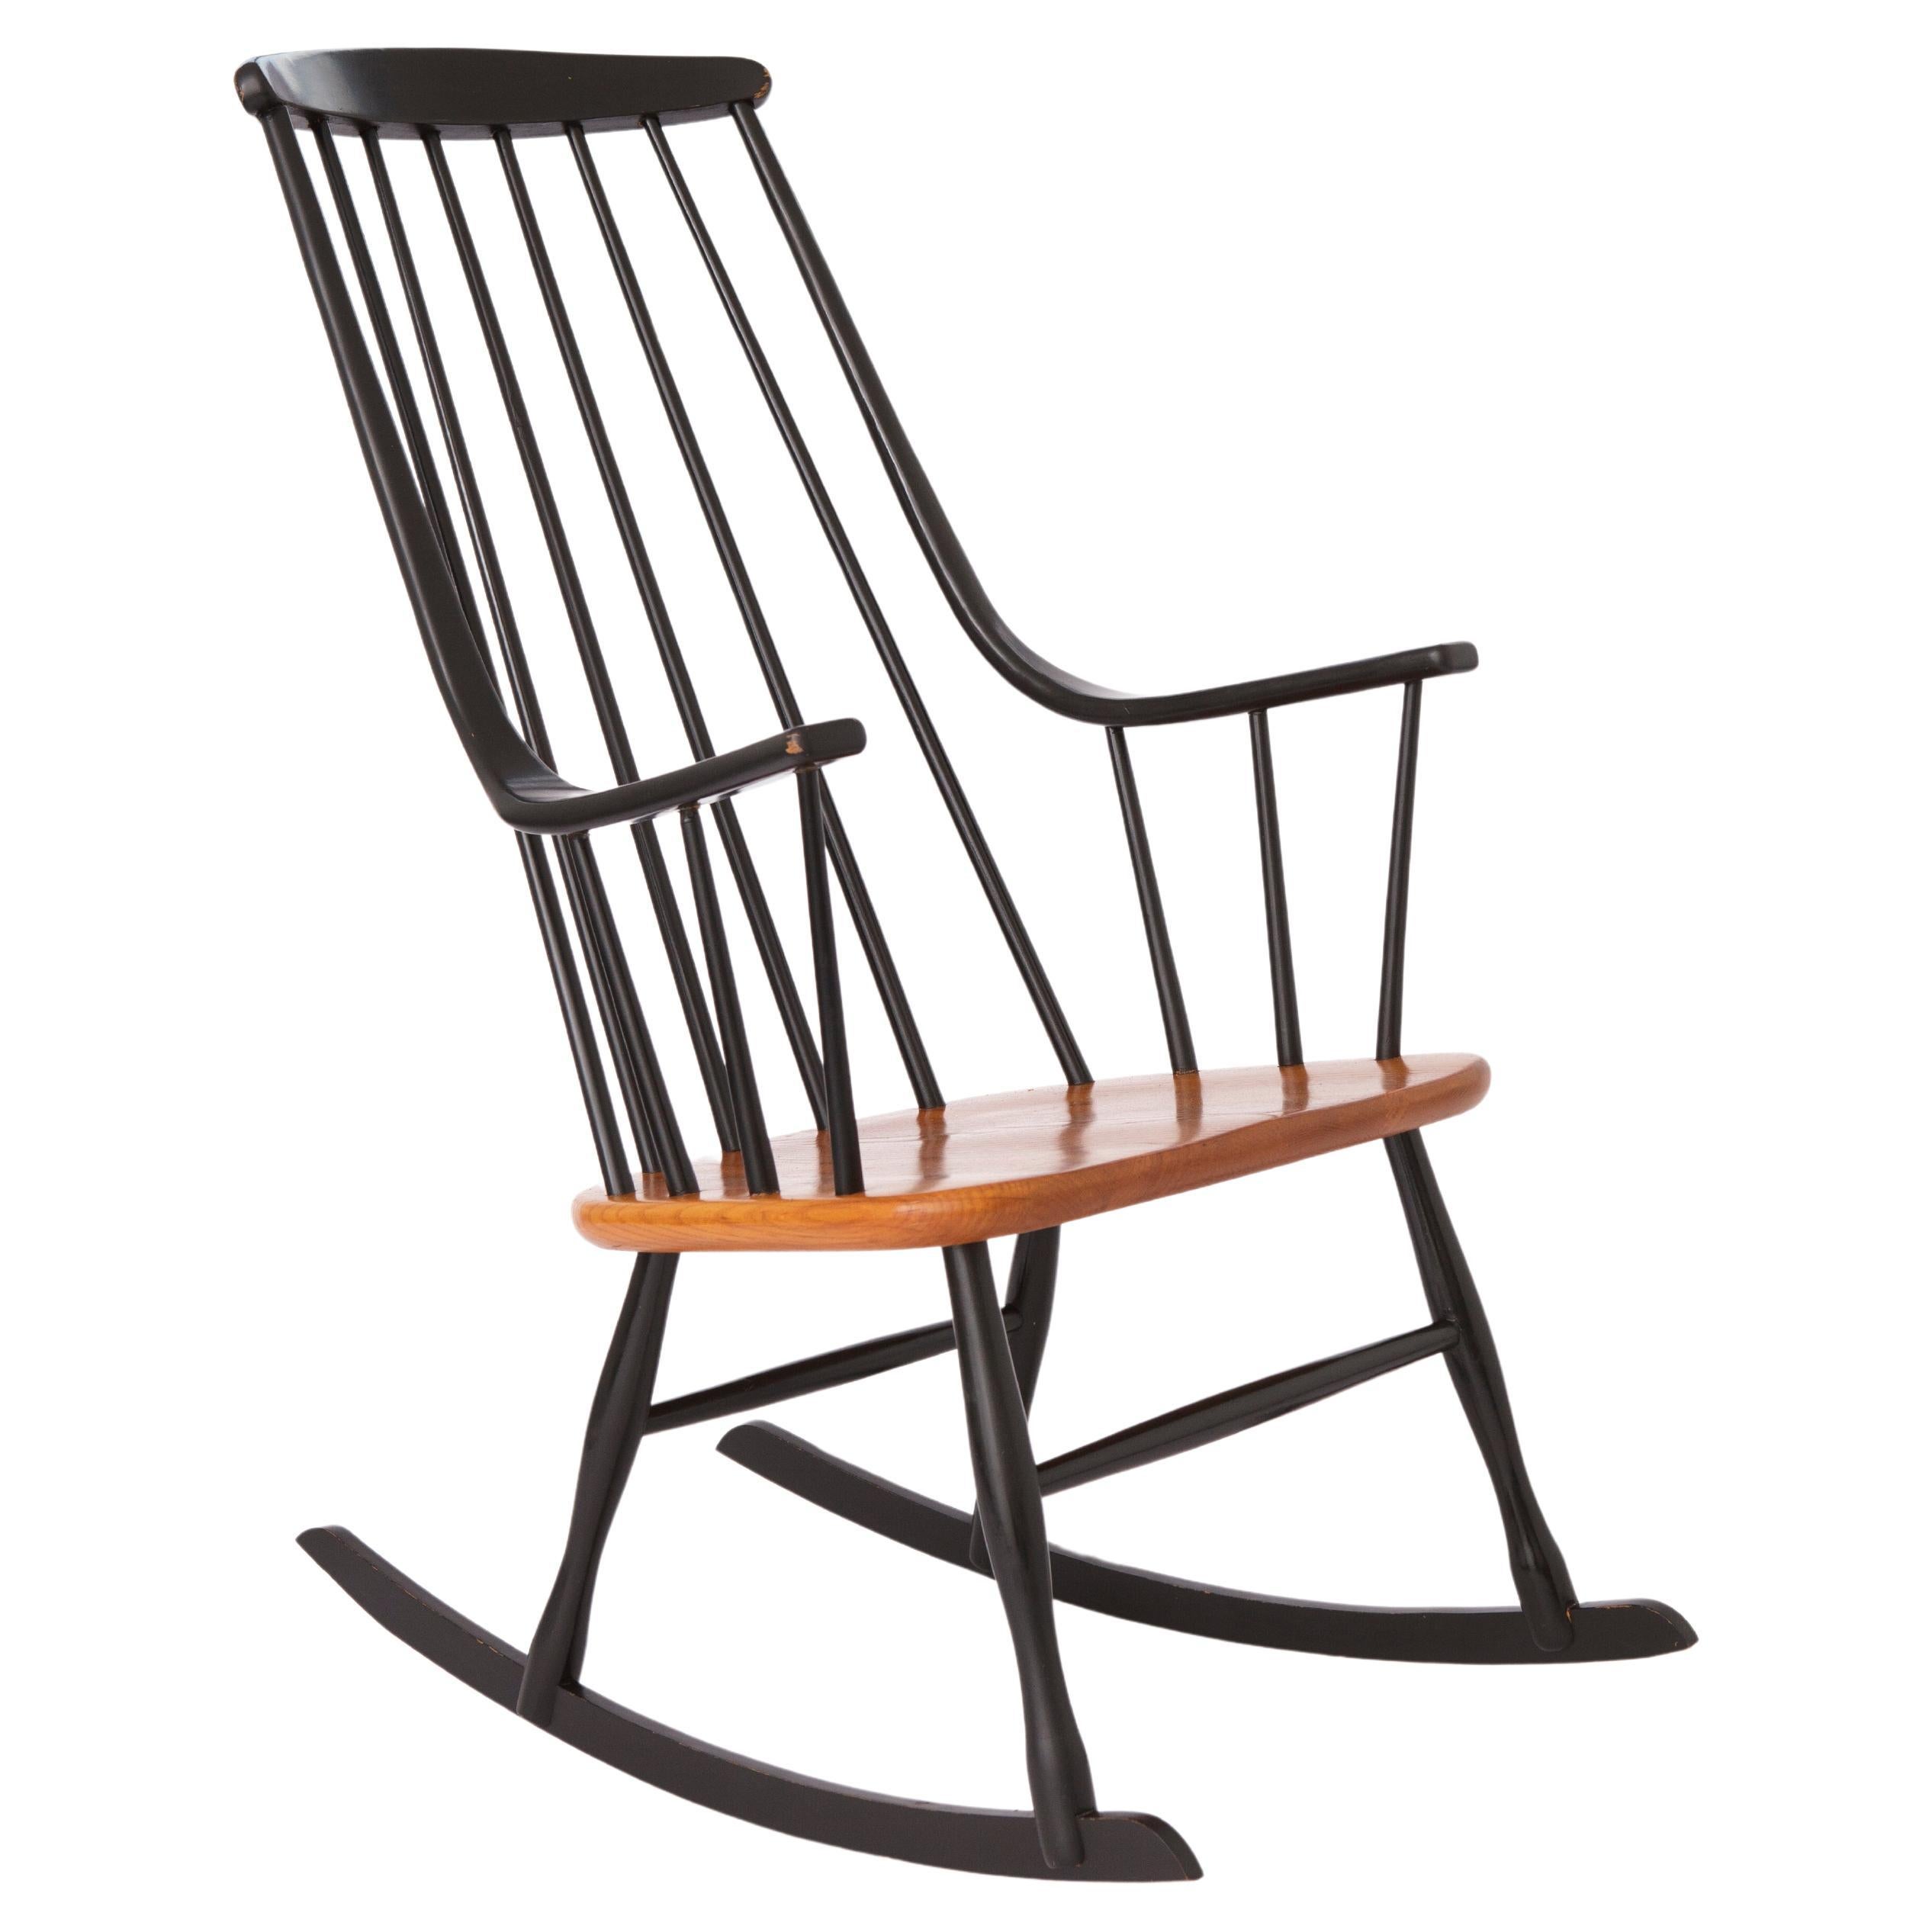 Rocking Chair 1960s by Lena Larsson for Nesto, Sweden For Sale